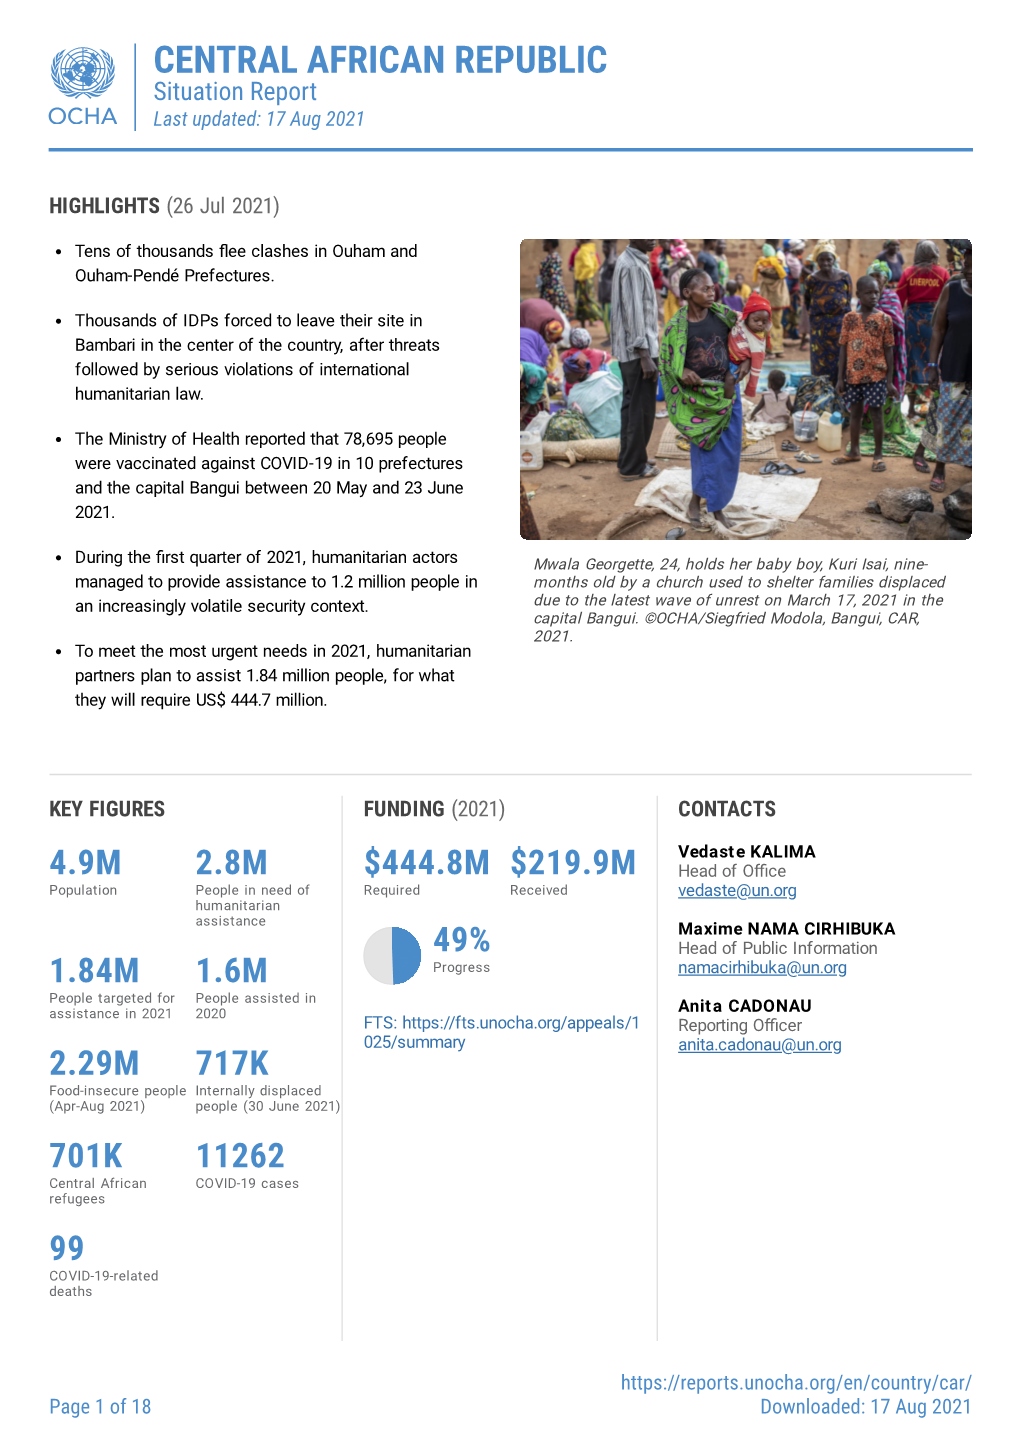 CENTRAL AFRICAN REPUBLIC Situation Report Last Updated: 17 Aug 2021